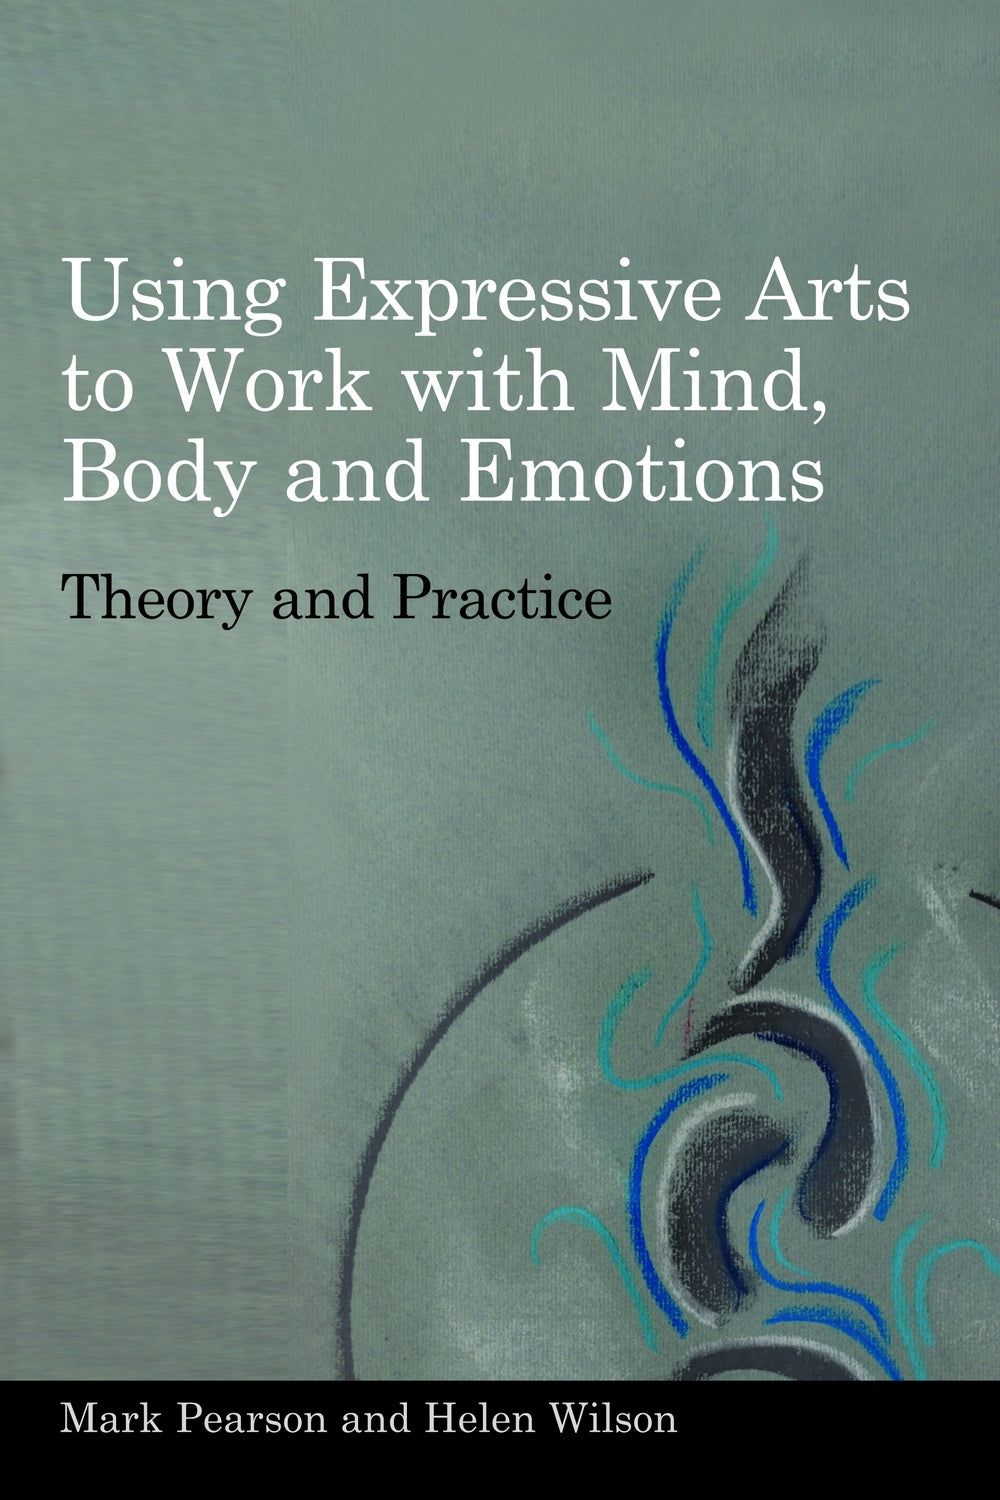 Using Expressive Arts to Work with Mind, Body and Emotions by Helen Wilson, Mark Pearson